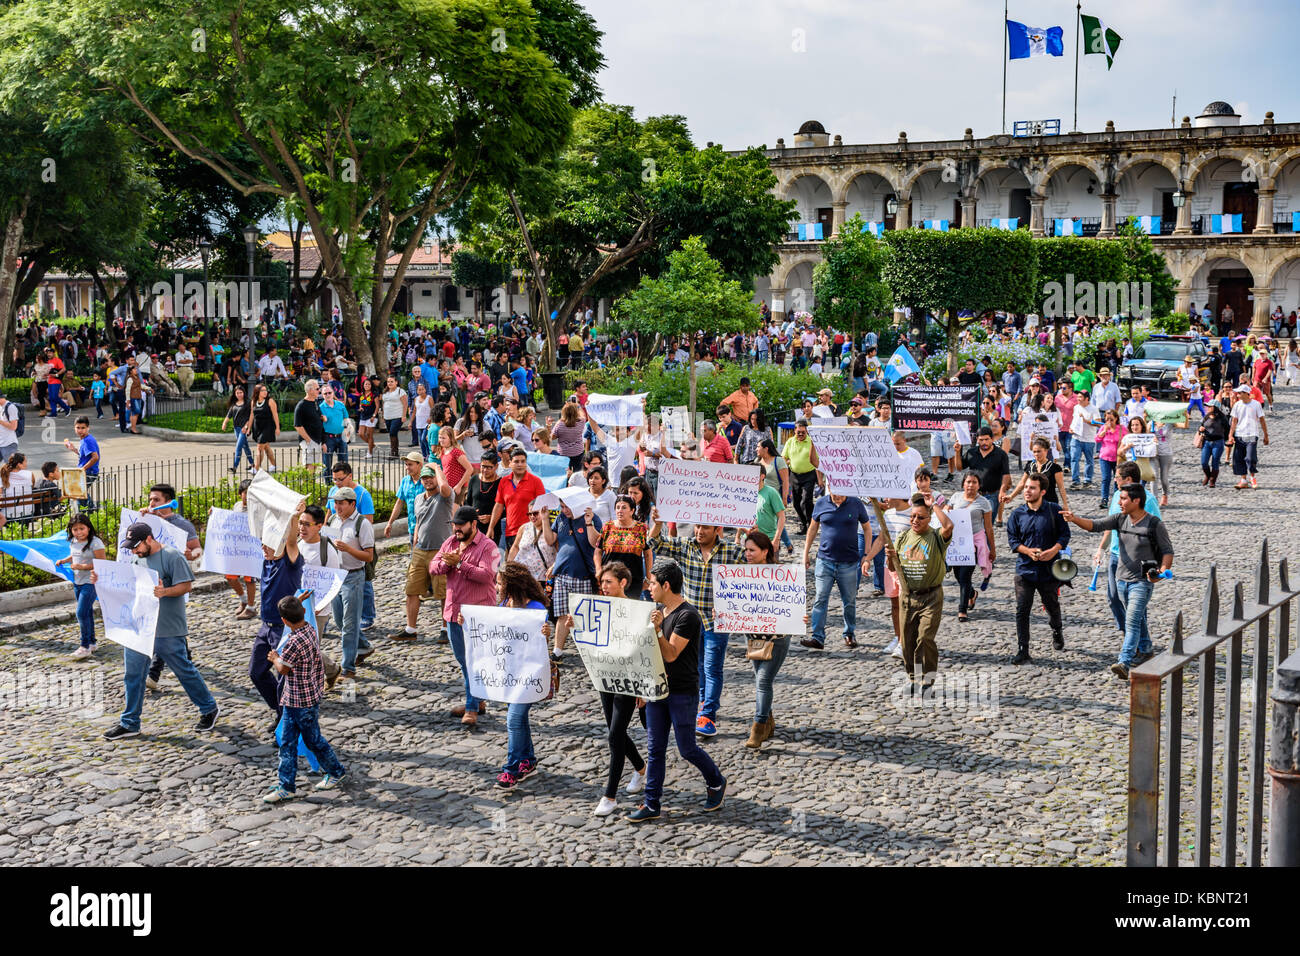 Antigua, Guatemala - September 15, 2017: Locals protest against government corruption around Antigua's central park on Guatemala's Independence Day. Stock Photo